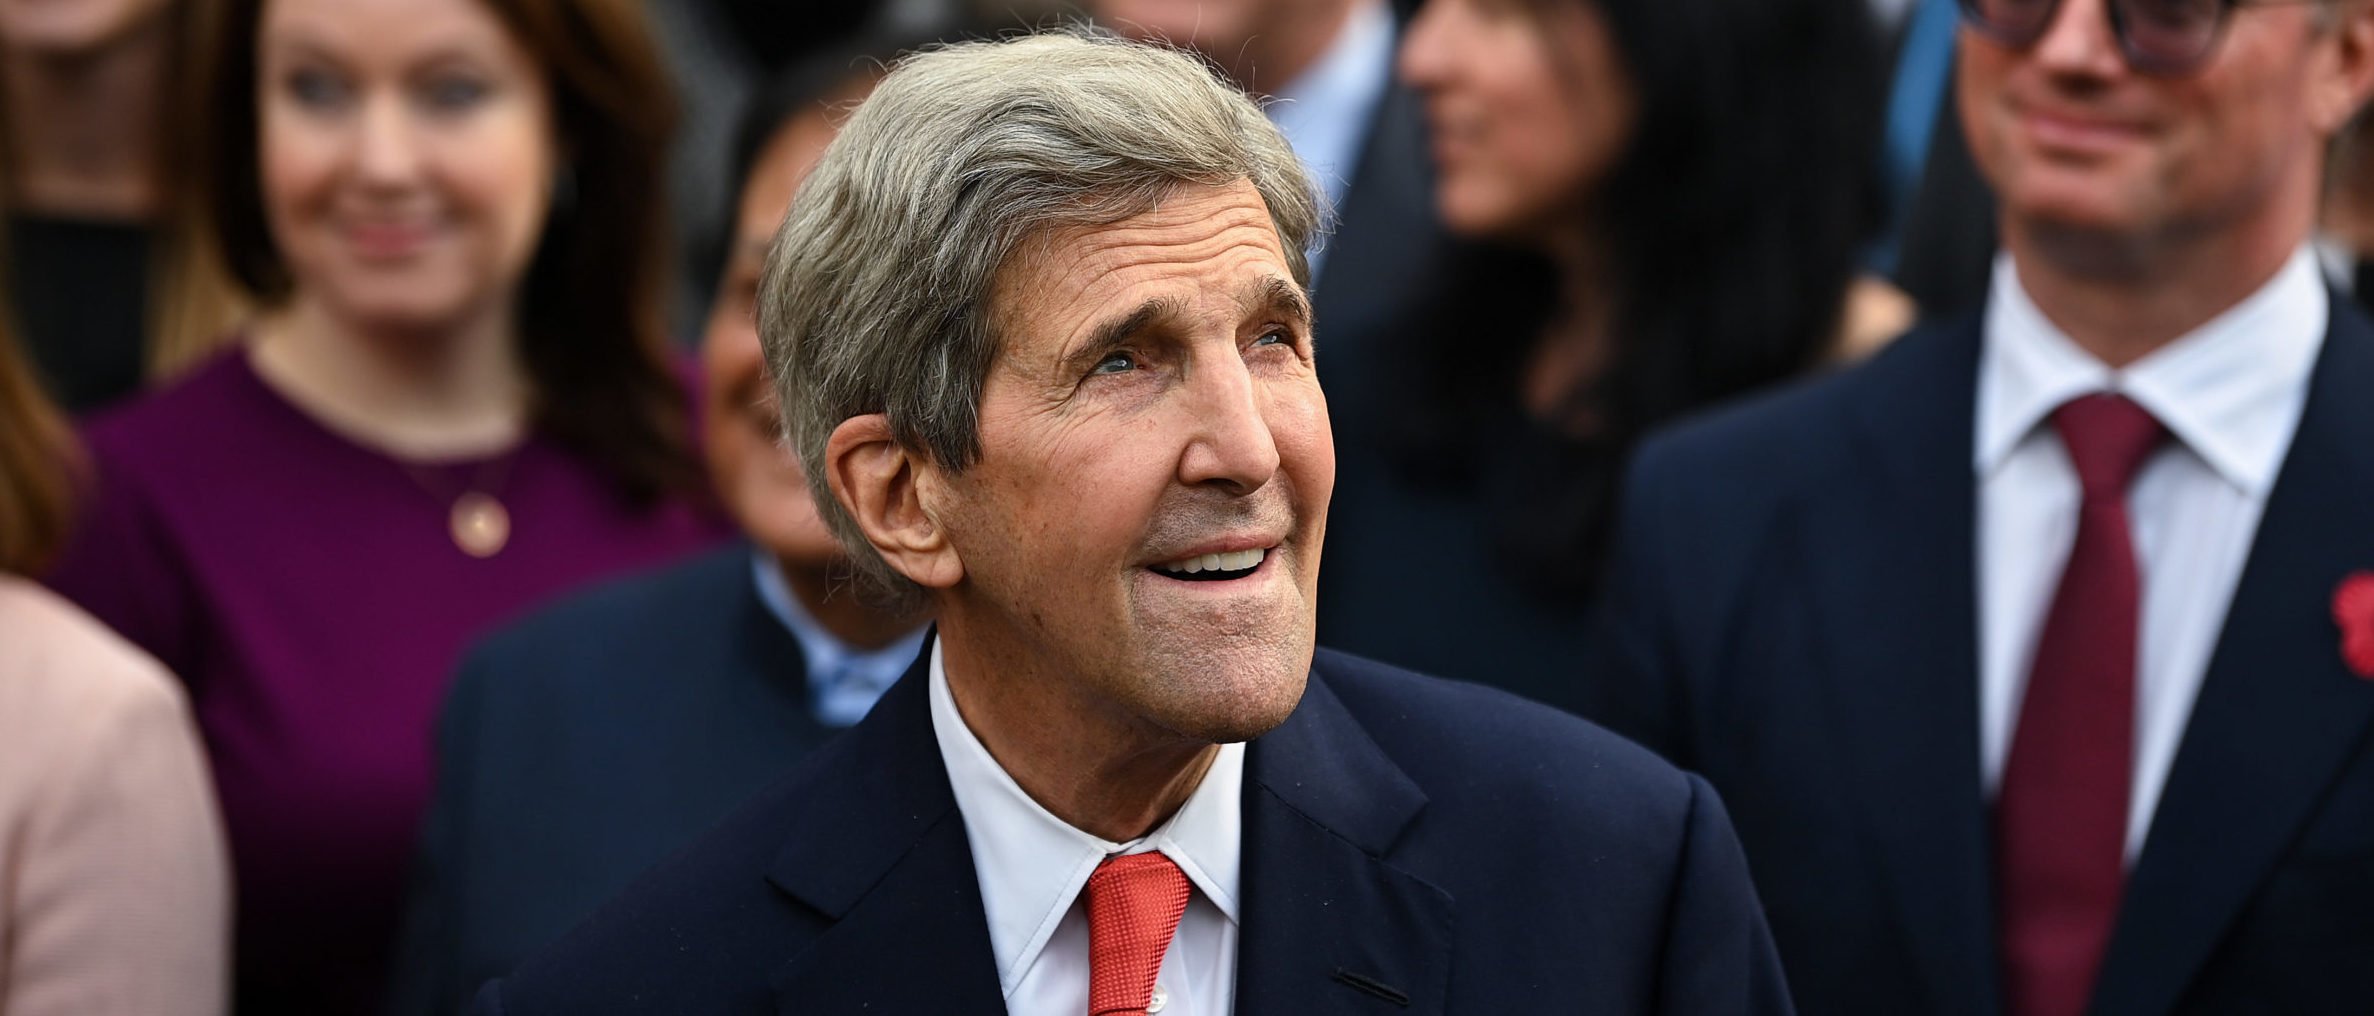 ‘You’ve Got Six Years’: John Kerry Issues Cryptic Threat To Natural Gas Industry | The Daily Caller